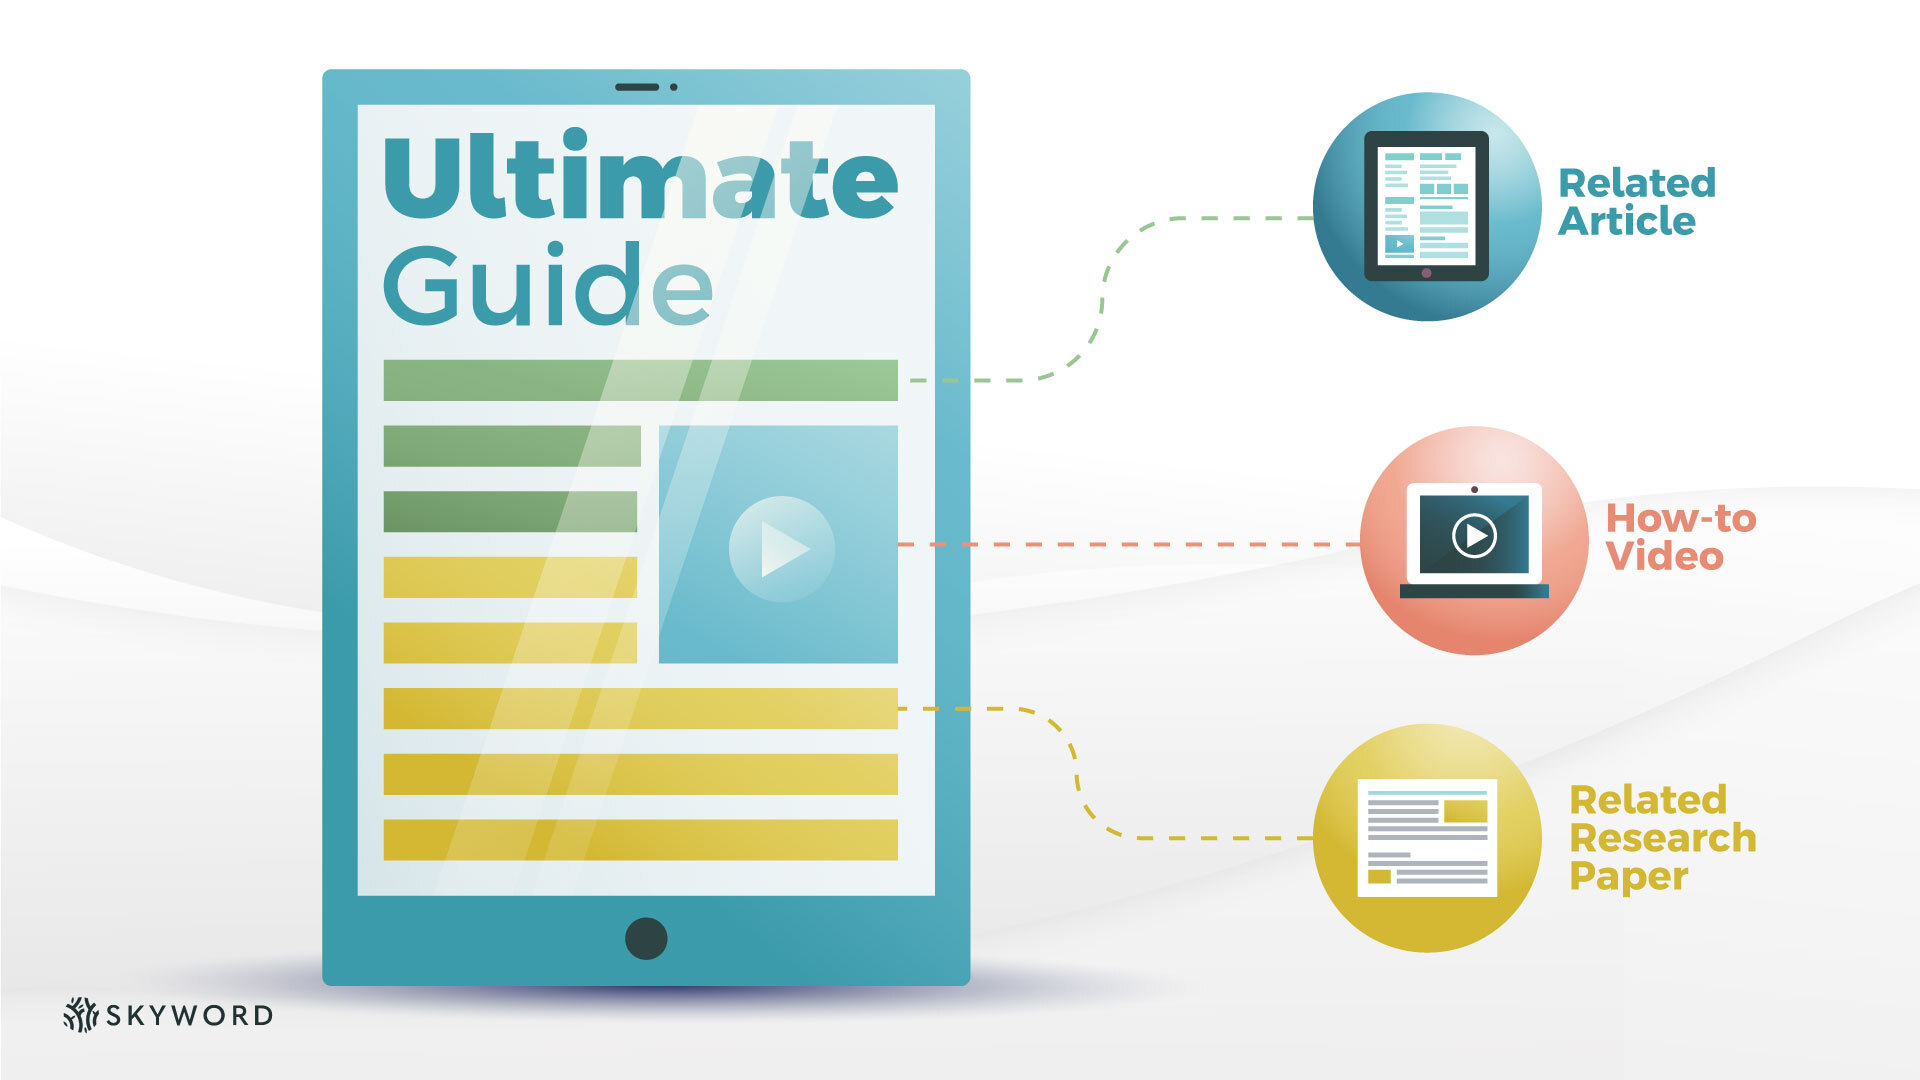 an ultimate guide crosslinking to related content